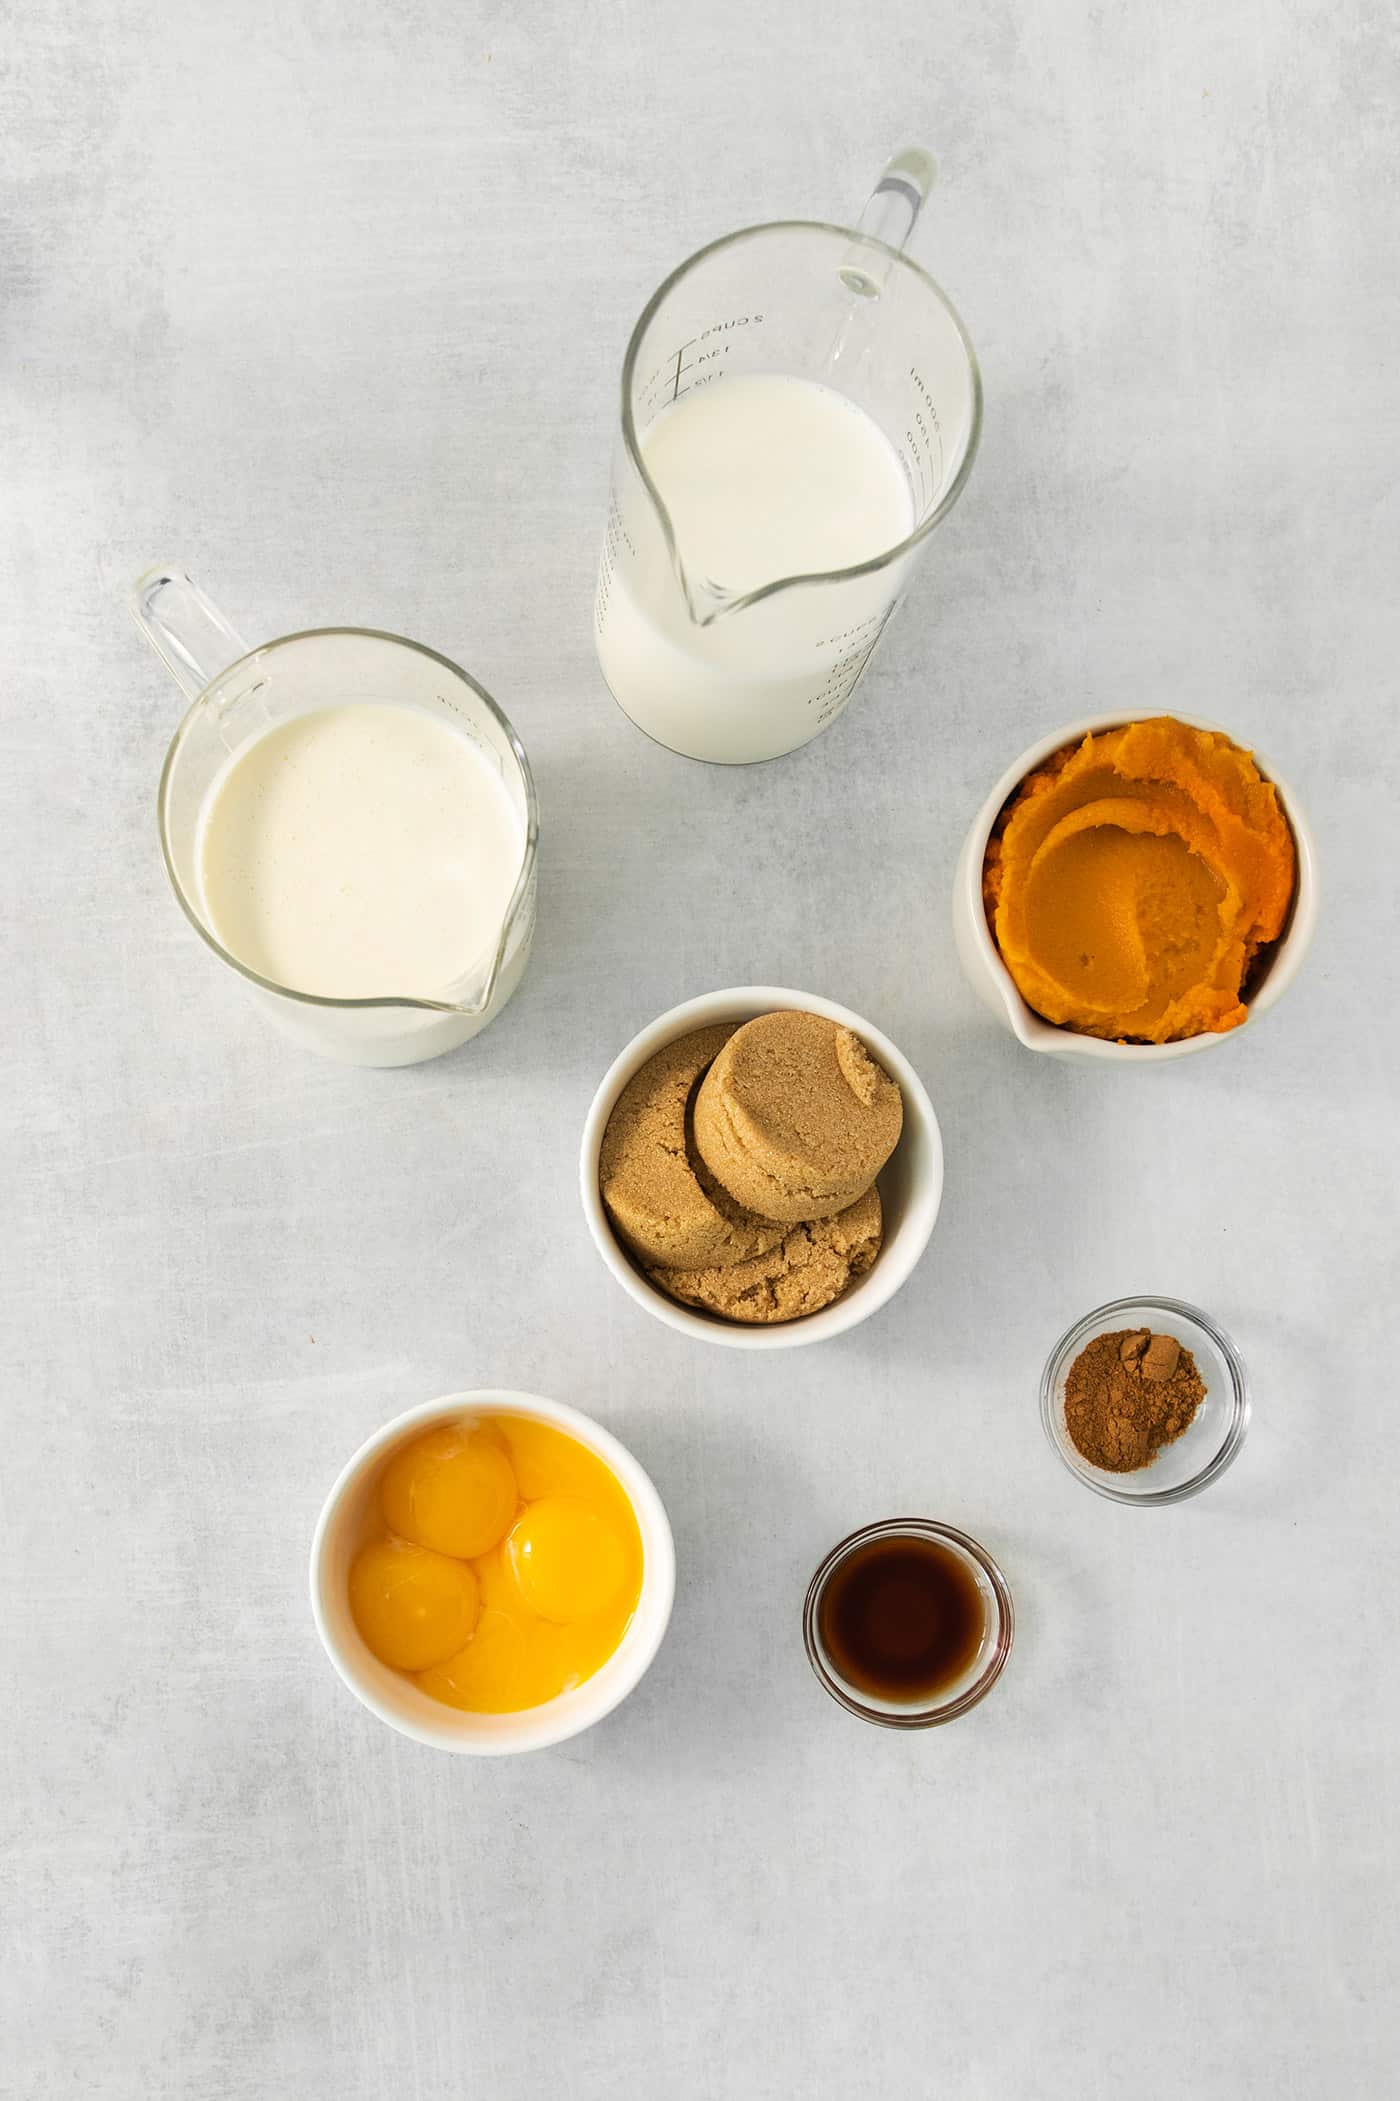 The ingredients for pumpkin ice cream are shown in bowls and pitchers on a white background including milk, cream, pumpkin puree, brown sugar, egg yolks, maple syrup, and pumpkin pie spice.